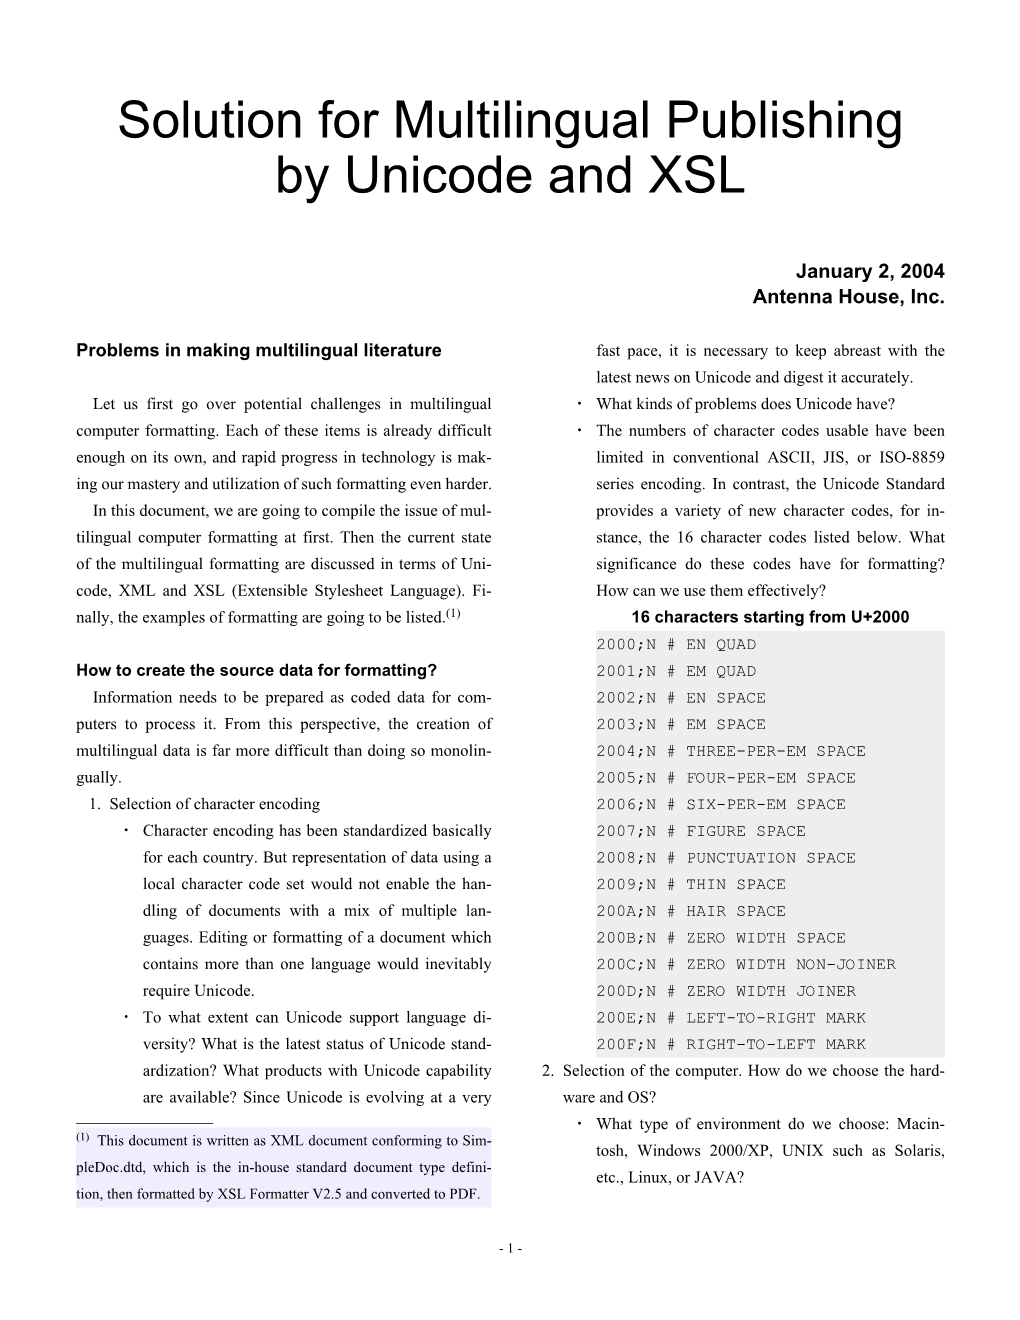 Solution for Multilingual Publishing by Unicode and XSL